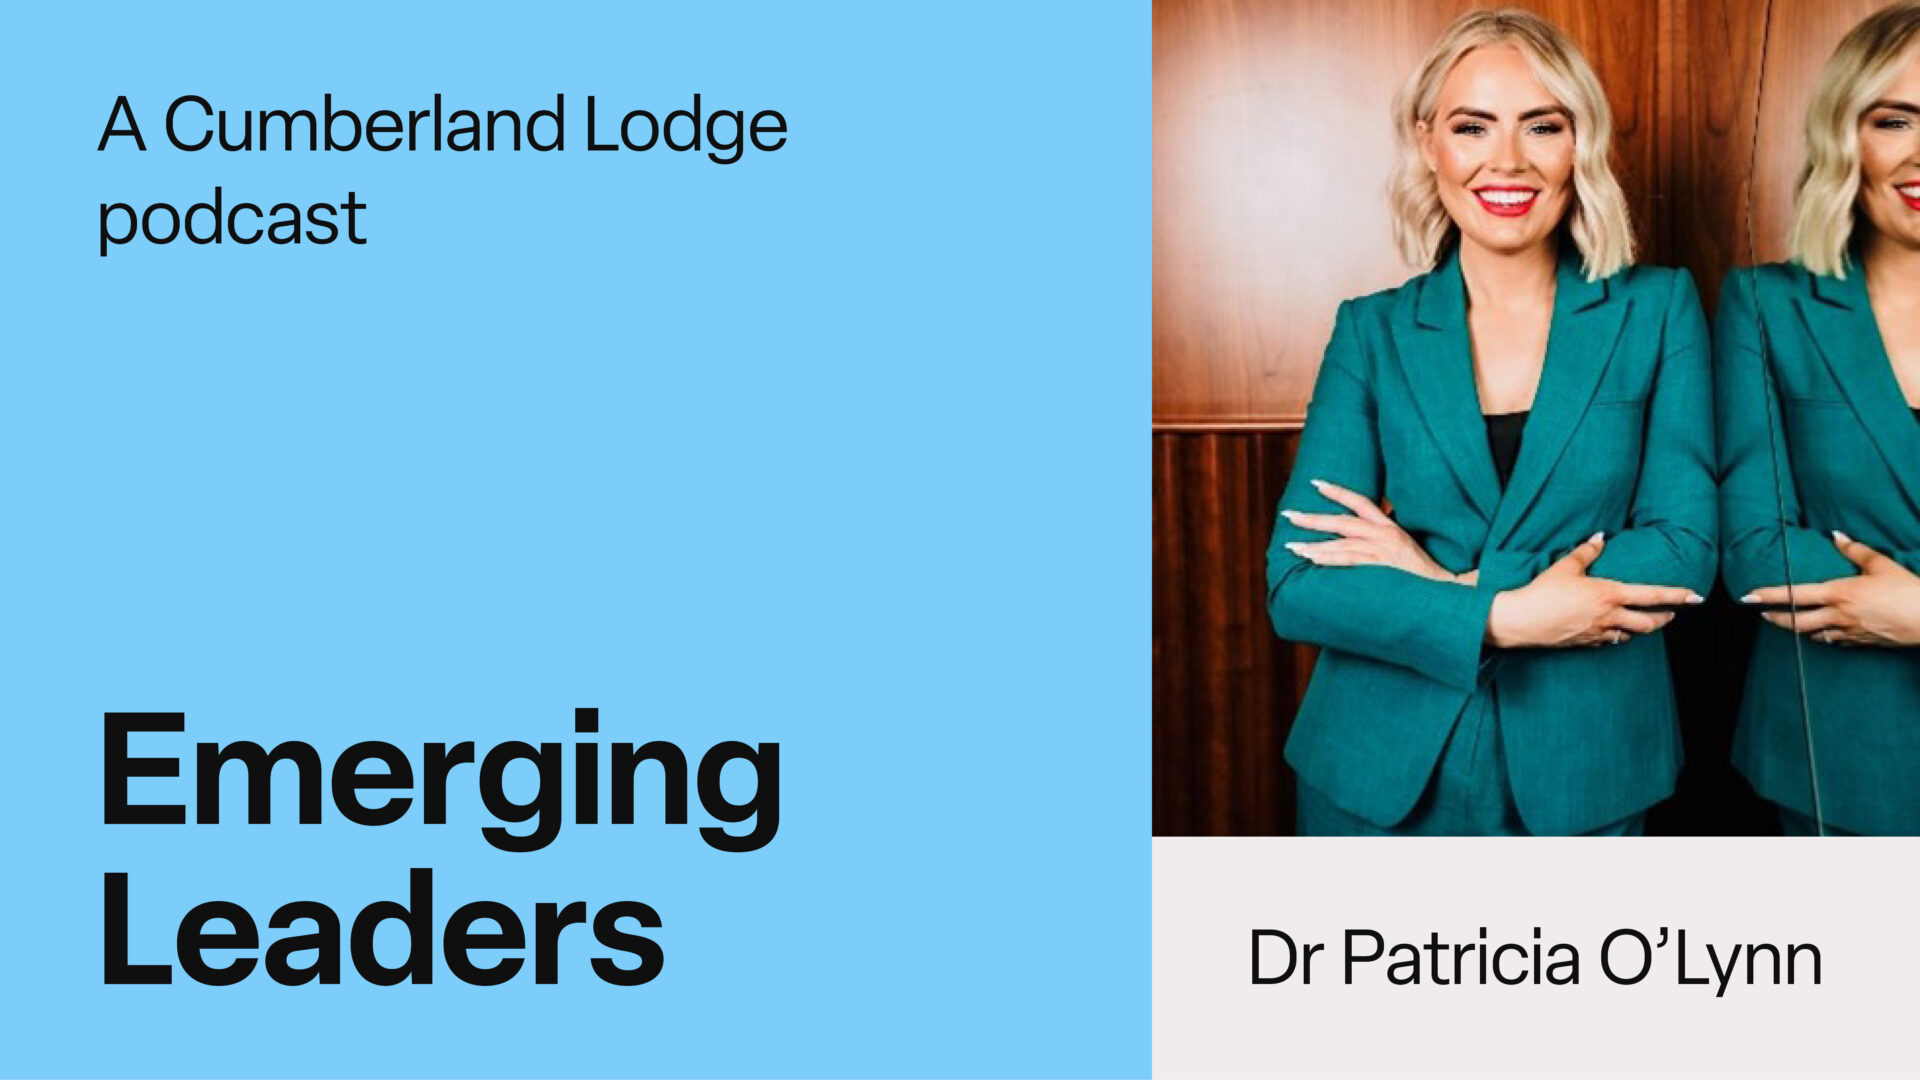 TEXT: A Cumberland Lodge Podcast. Emerging Leaders: Dr Patricia O'Lynn - Personal Values in Leadership